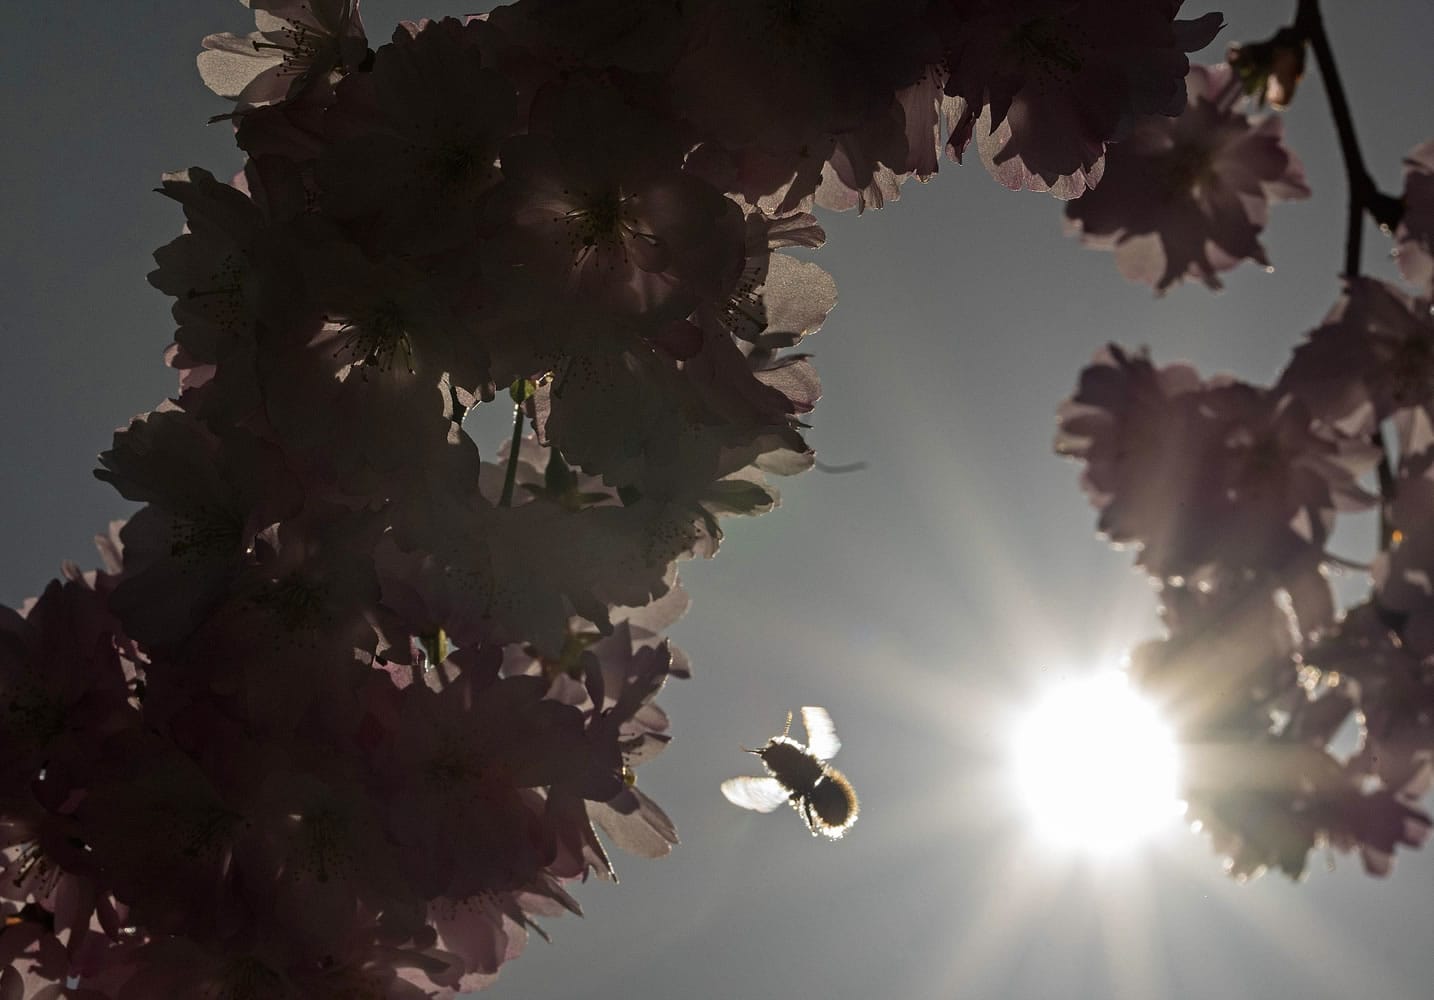 Associated Press files
A bumblebee approaches blooms on an almond tree in Erfurt, central Germany. A new study says climate change is shrinking the geographic range of many bumblebee species in North America and Europe, which could put them at risk of dying out.